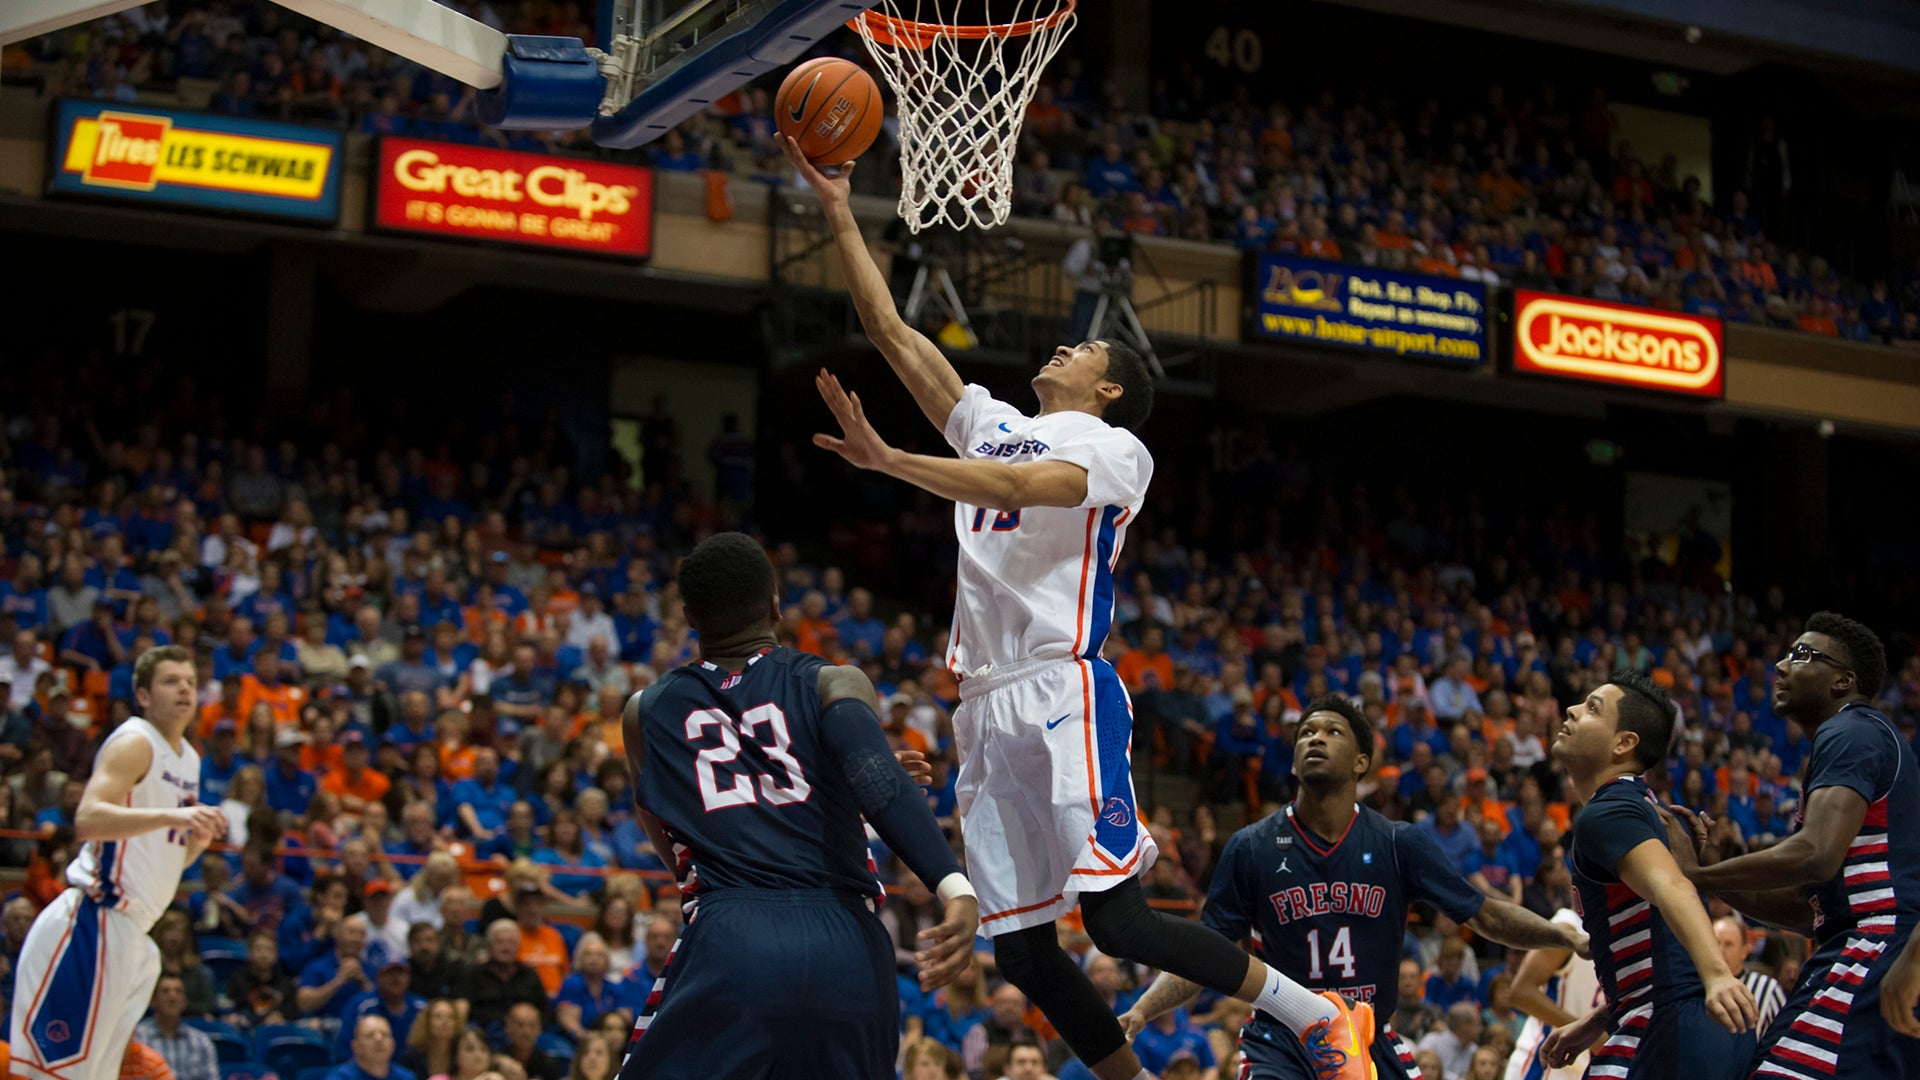 Boise State Basketball player jumps to put ball in hoop